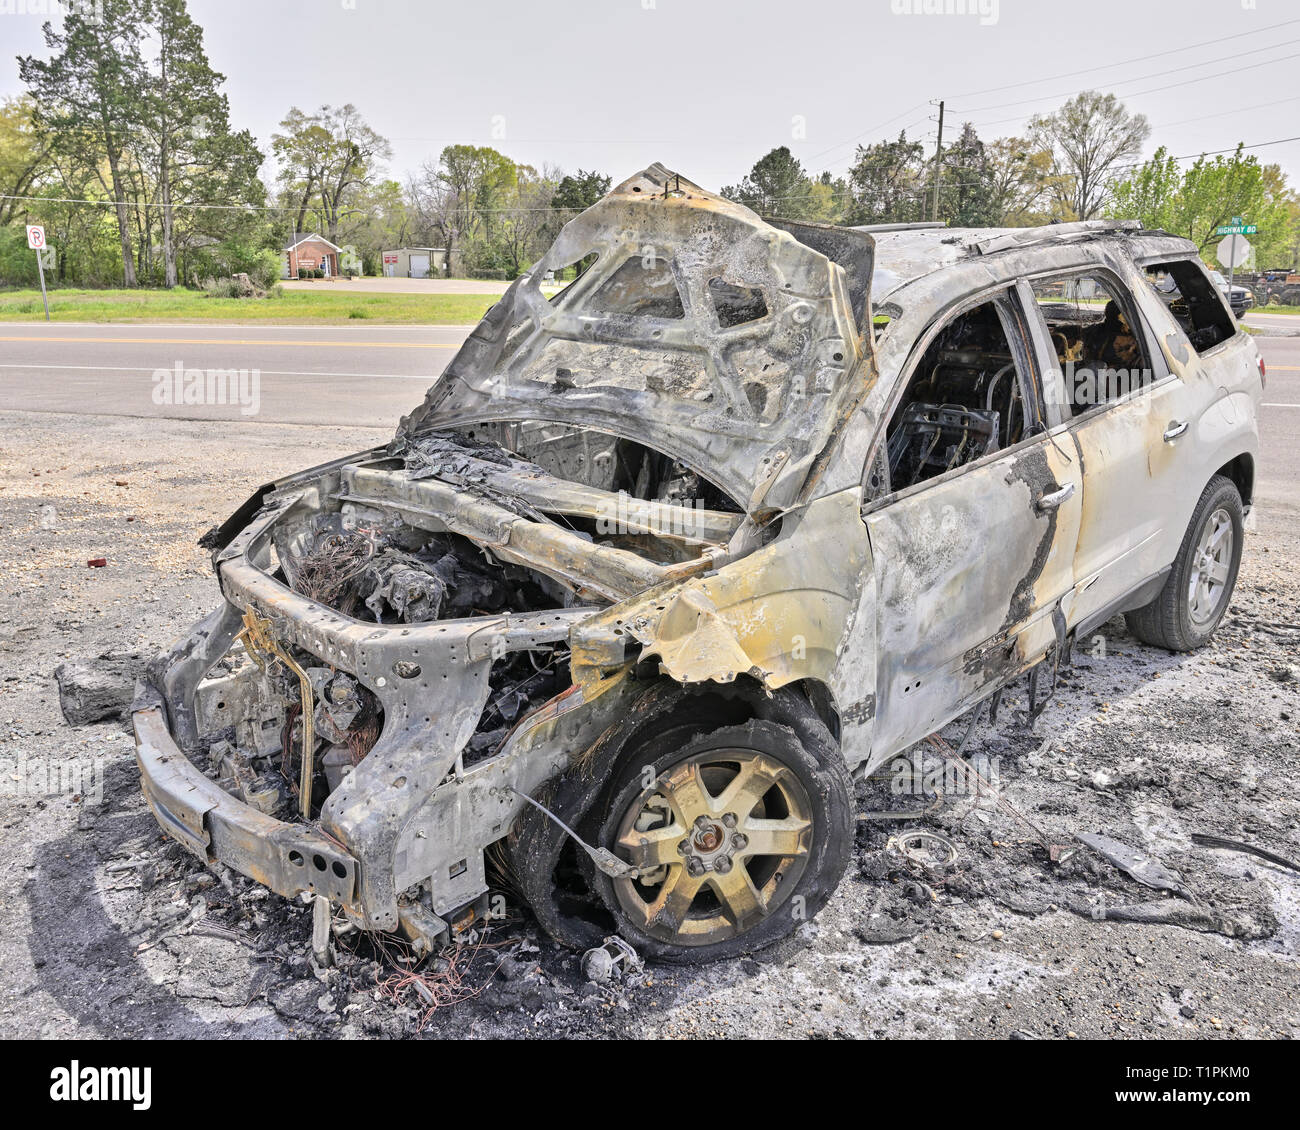 Burned out car or suv on the side of the road in rural Alabama, USA. Stock Photo